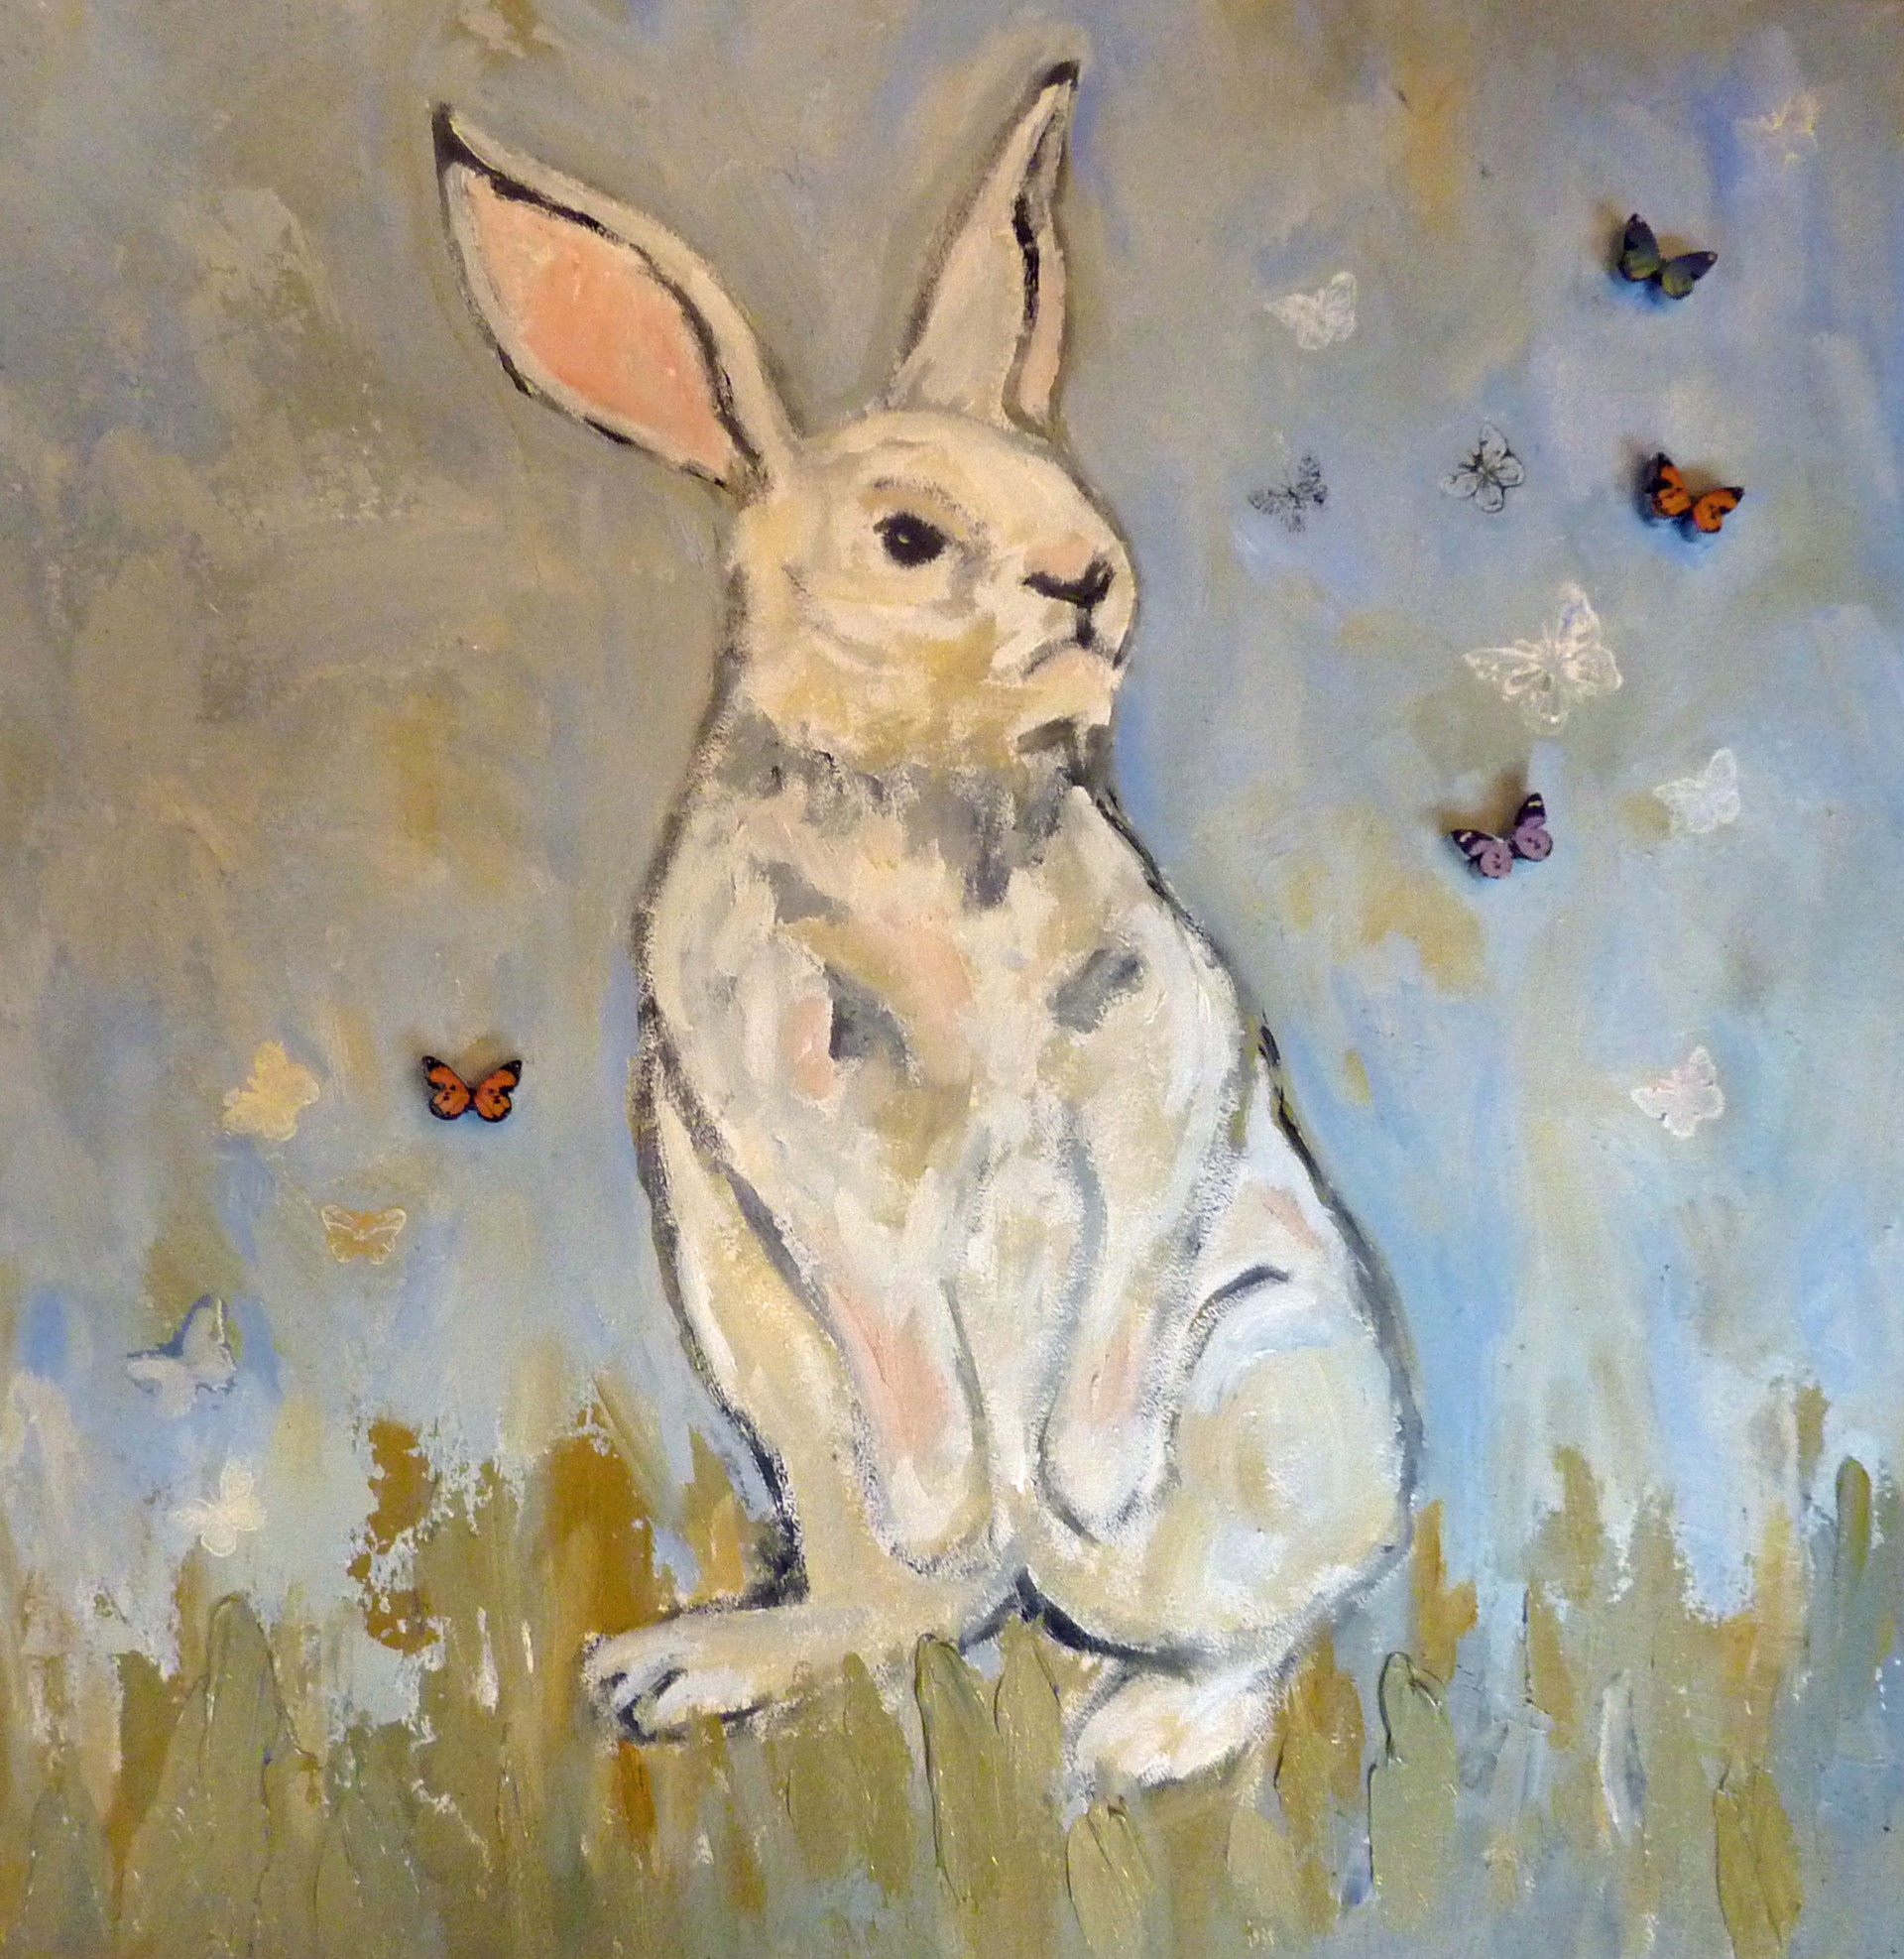 Bunny and Butterflies by Cindi Underwood